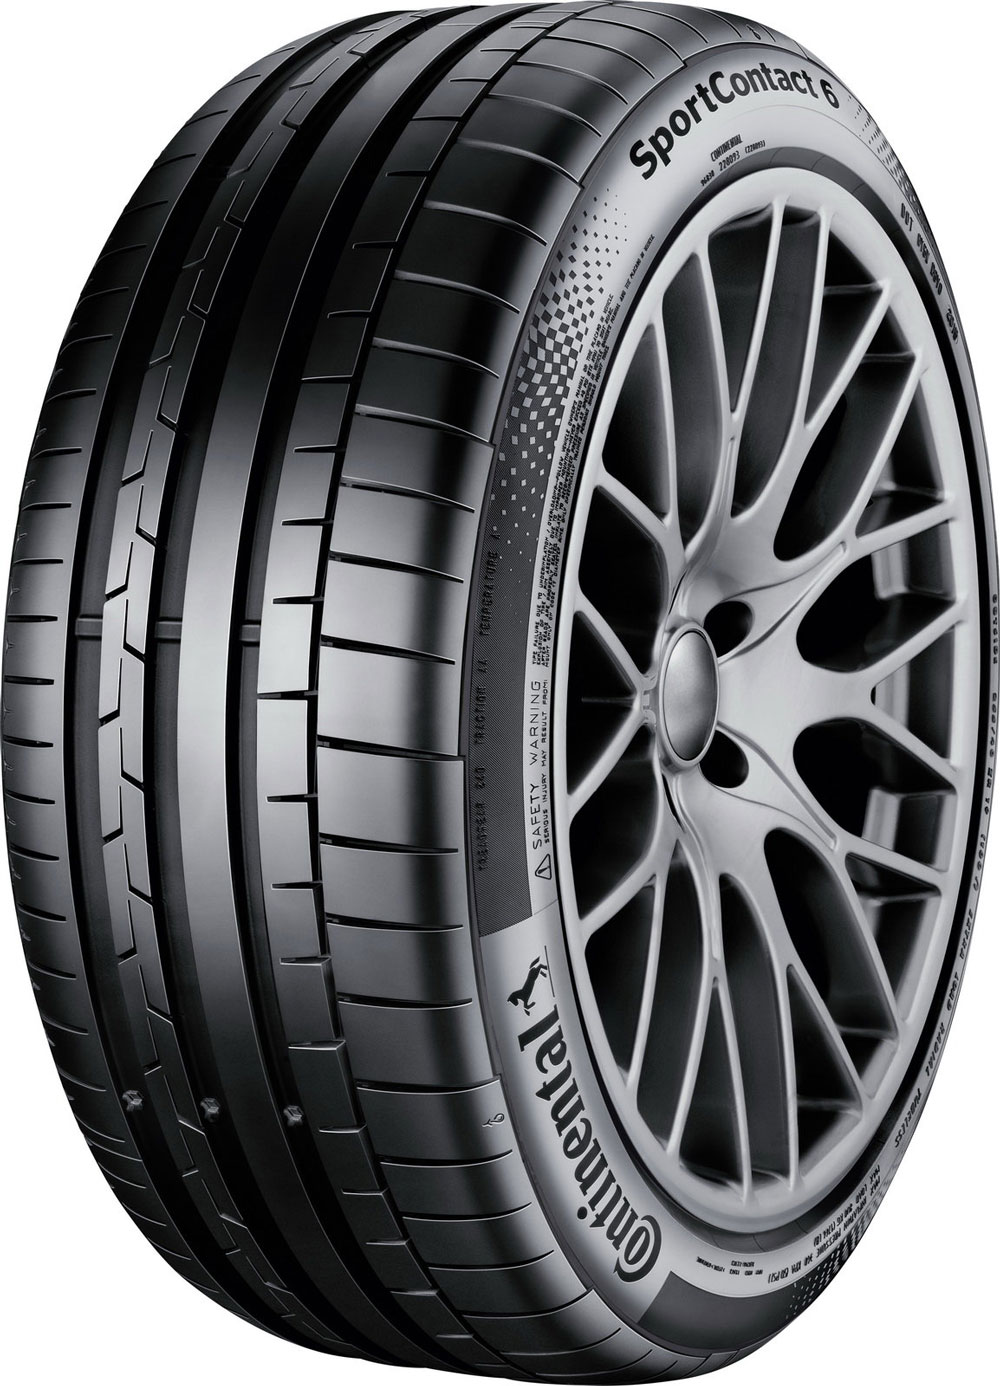 CONTINENTAL SPORT CONTACT 6 XL FP 295/30 R22 103Y